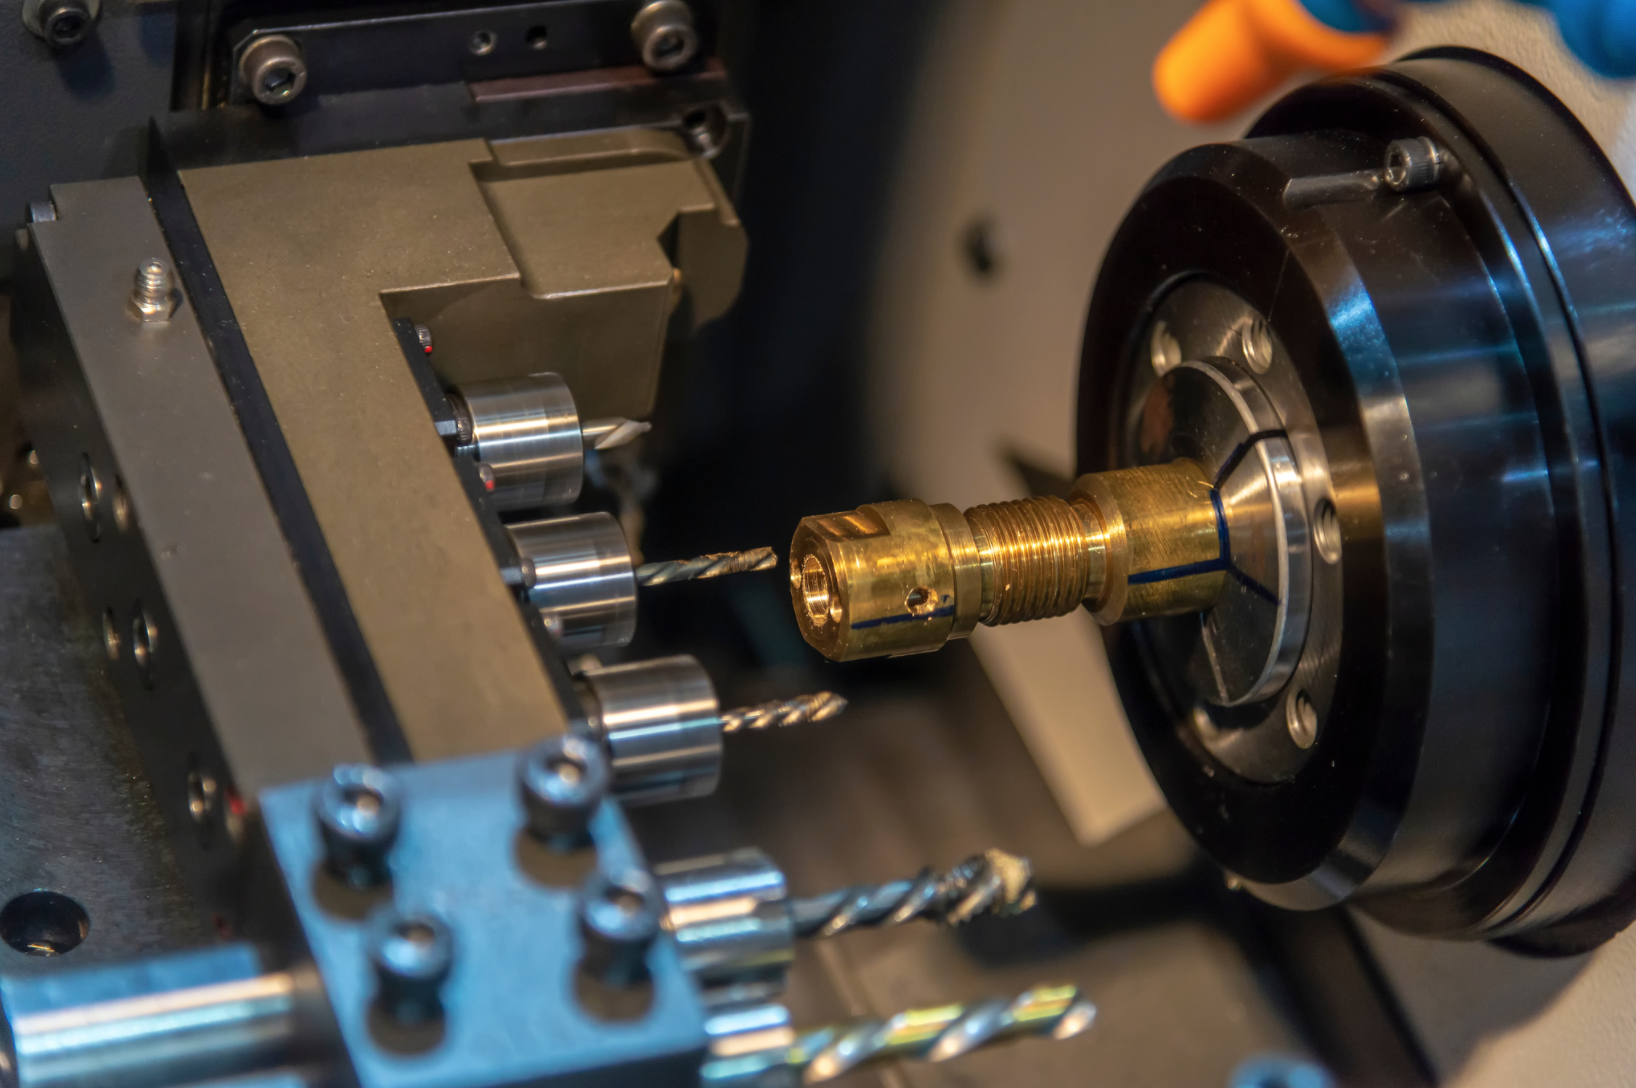 Swiss-style machine tools with large tool capacities like the one shown here have a better chance at competing in the automotive world than traditional CNC lathes and machining centers.